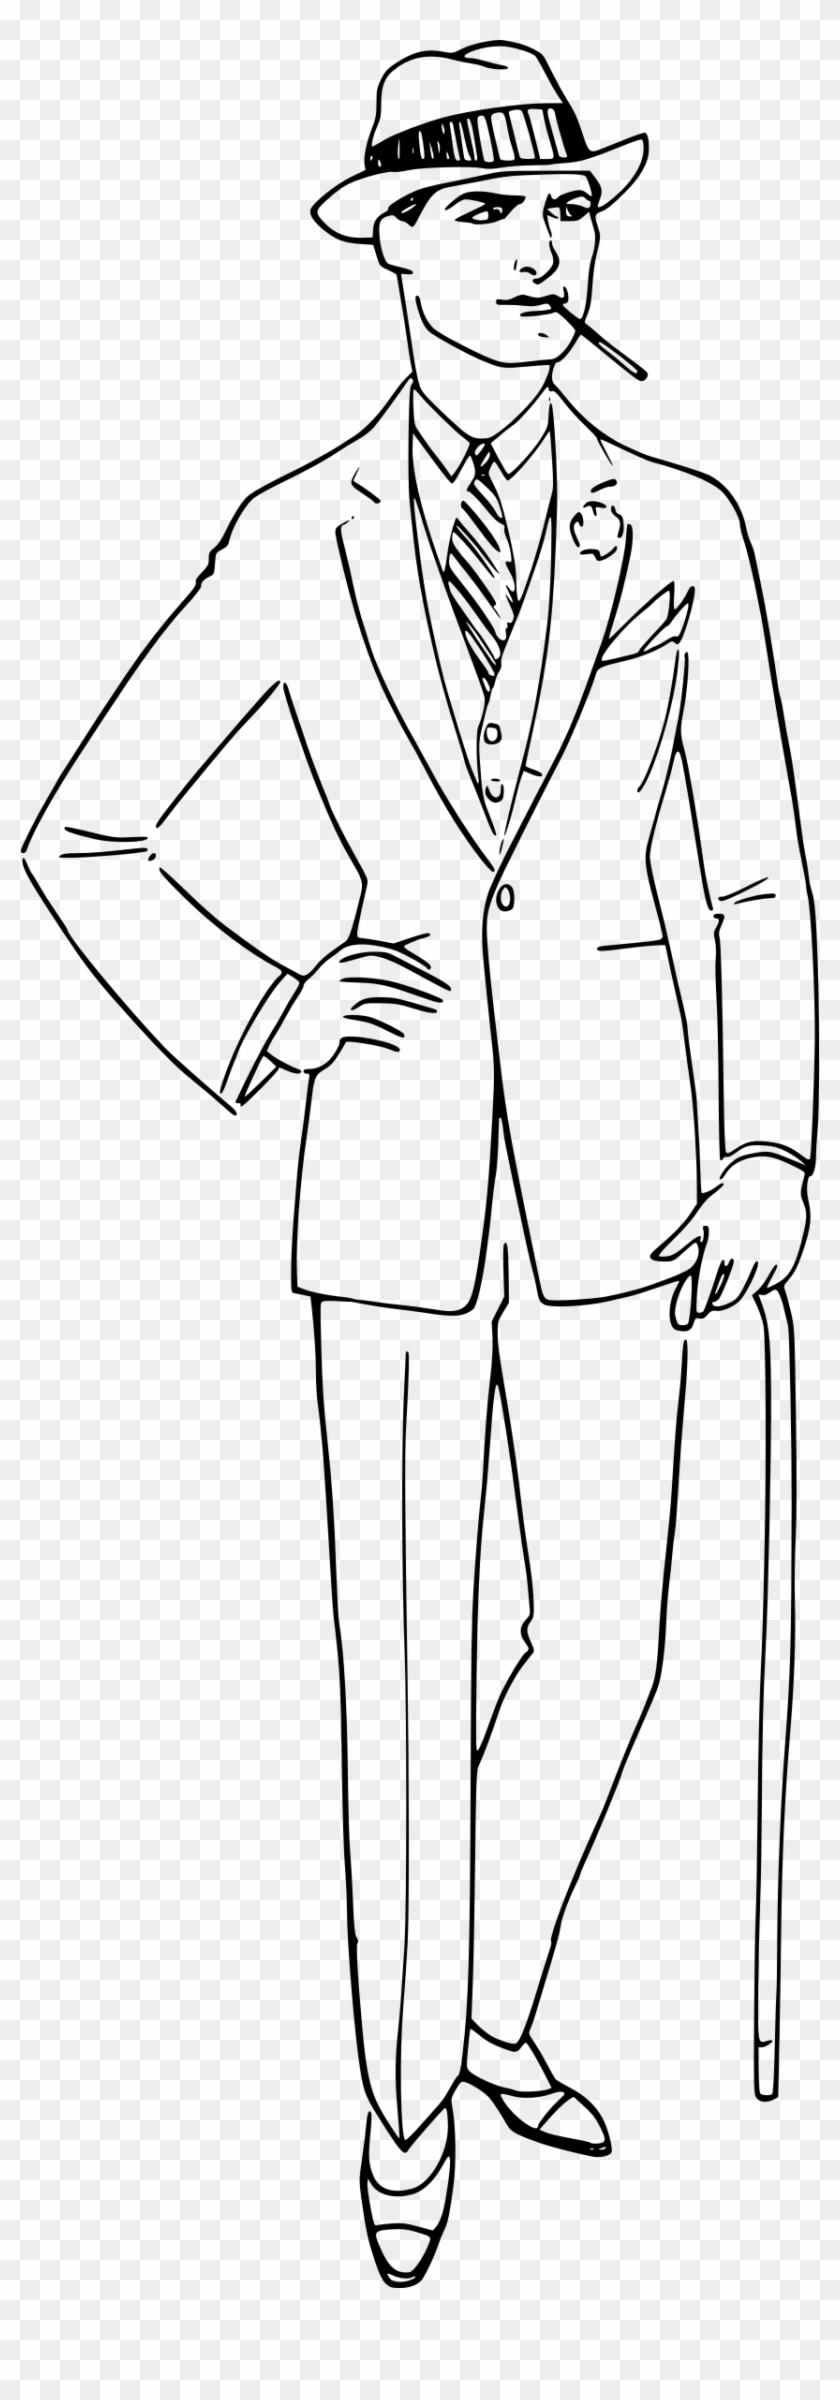 This Free Icons Png Design Of Man In A White Suit - Clip Art Black And White Man Transparent Png #4063072